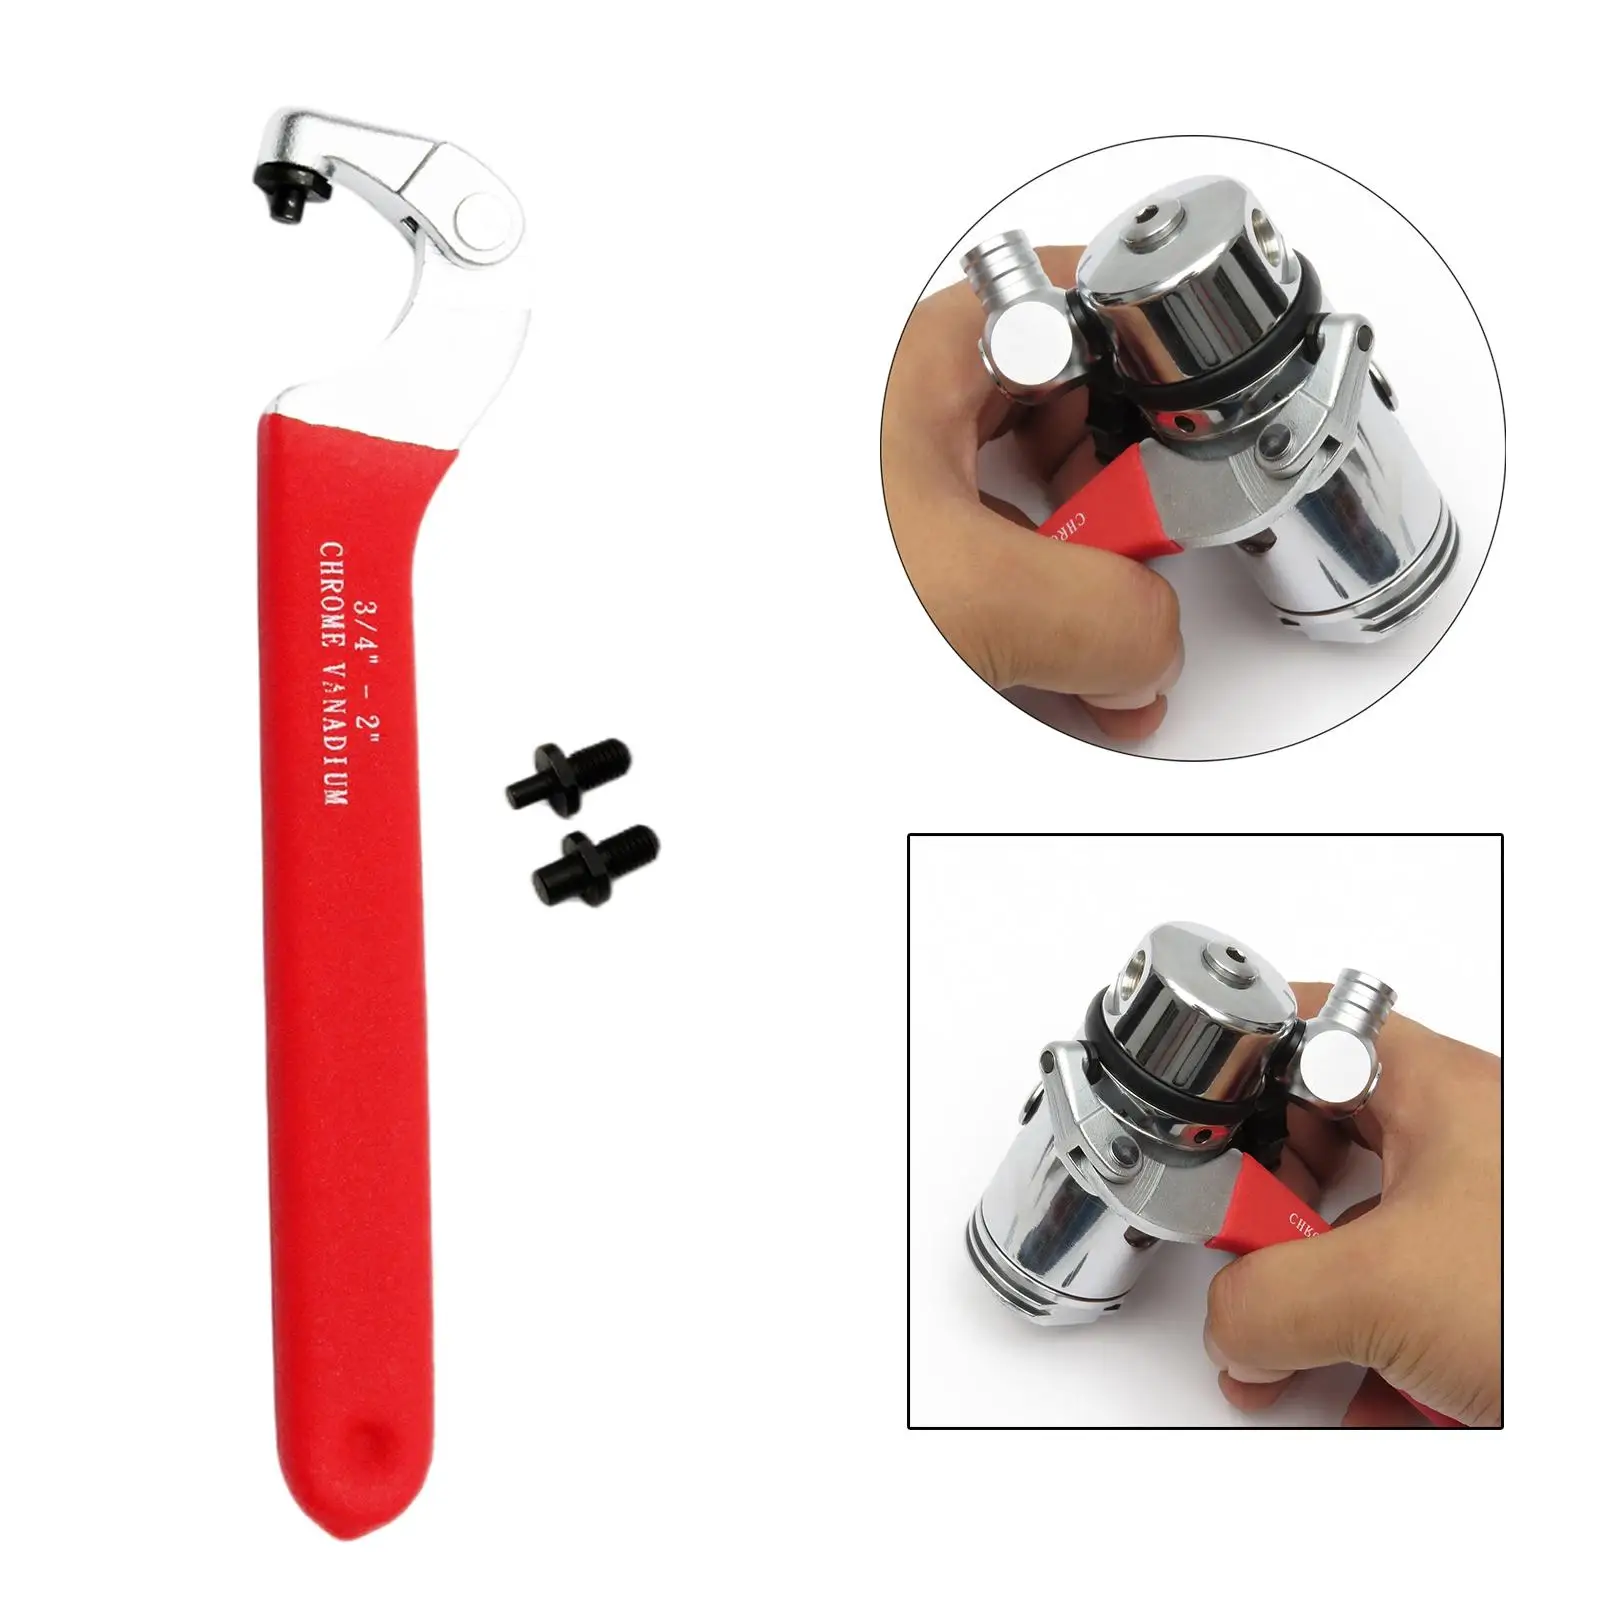 Adjustable Scuba Diving Spanner Wrench Carbon Steel Maintenance Service Tool Scuba Choice Portable for Outdoor Supplies